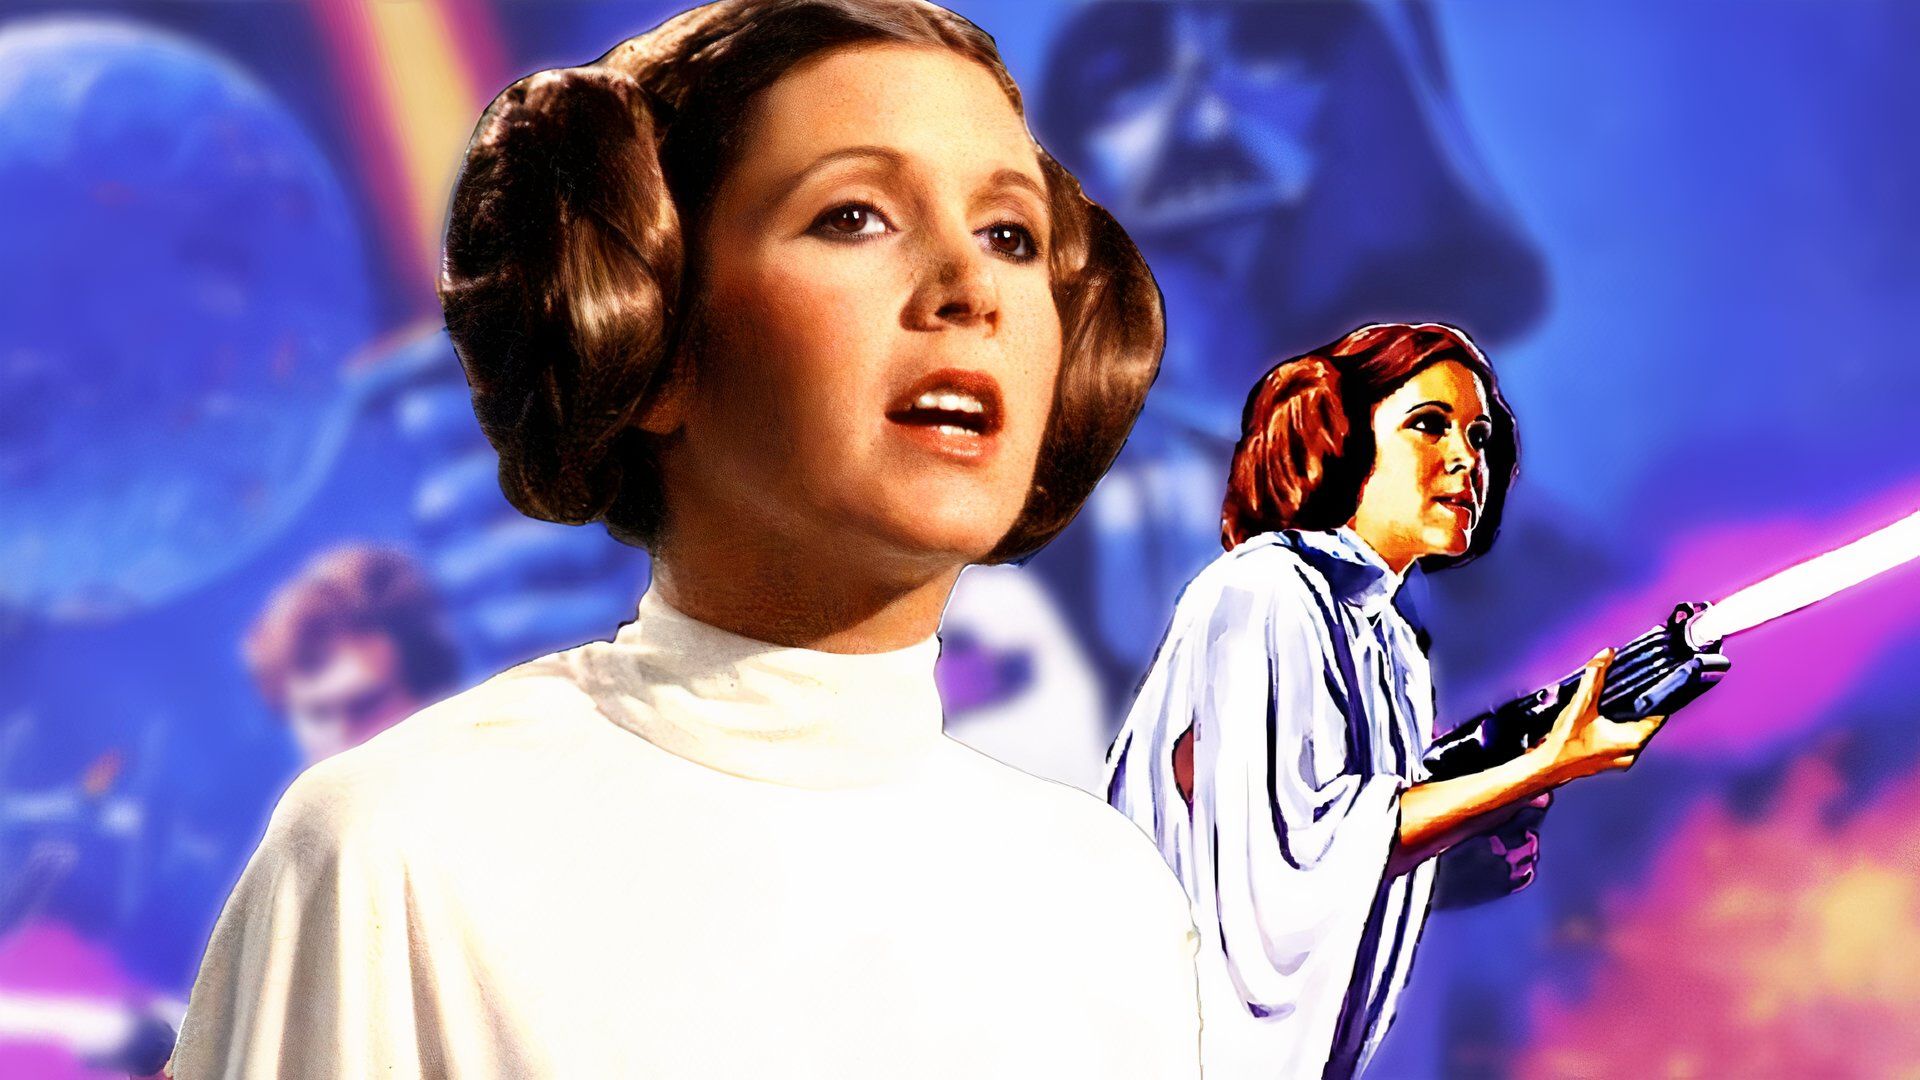 Carrie Fisher as Princess Leia with Star Wars poster